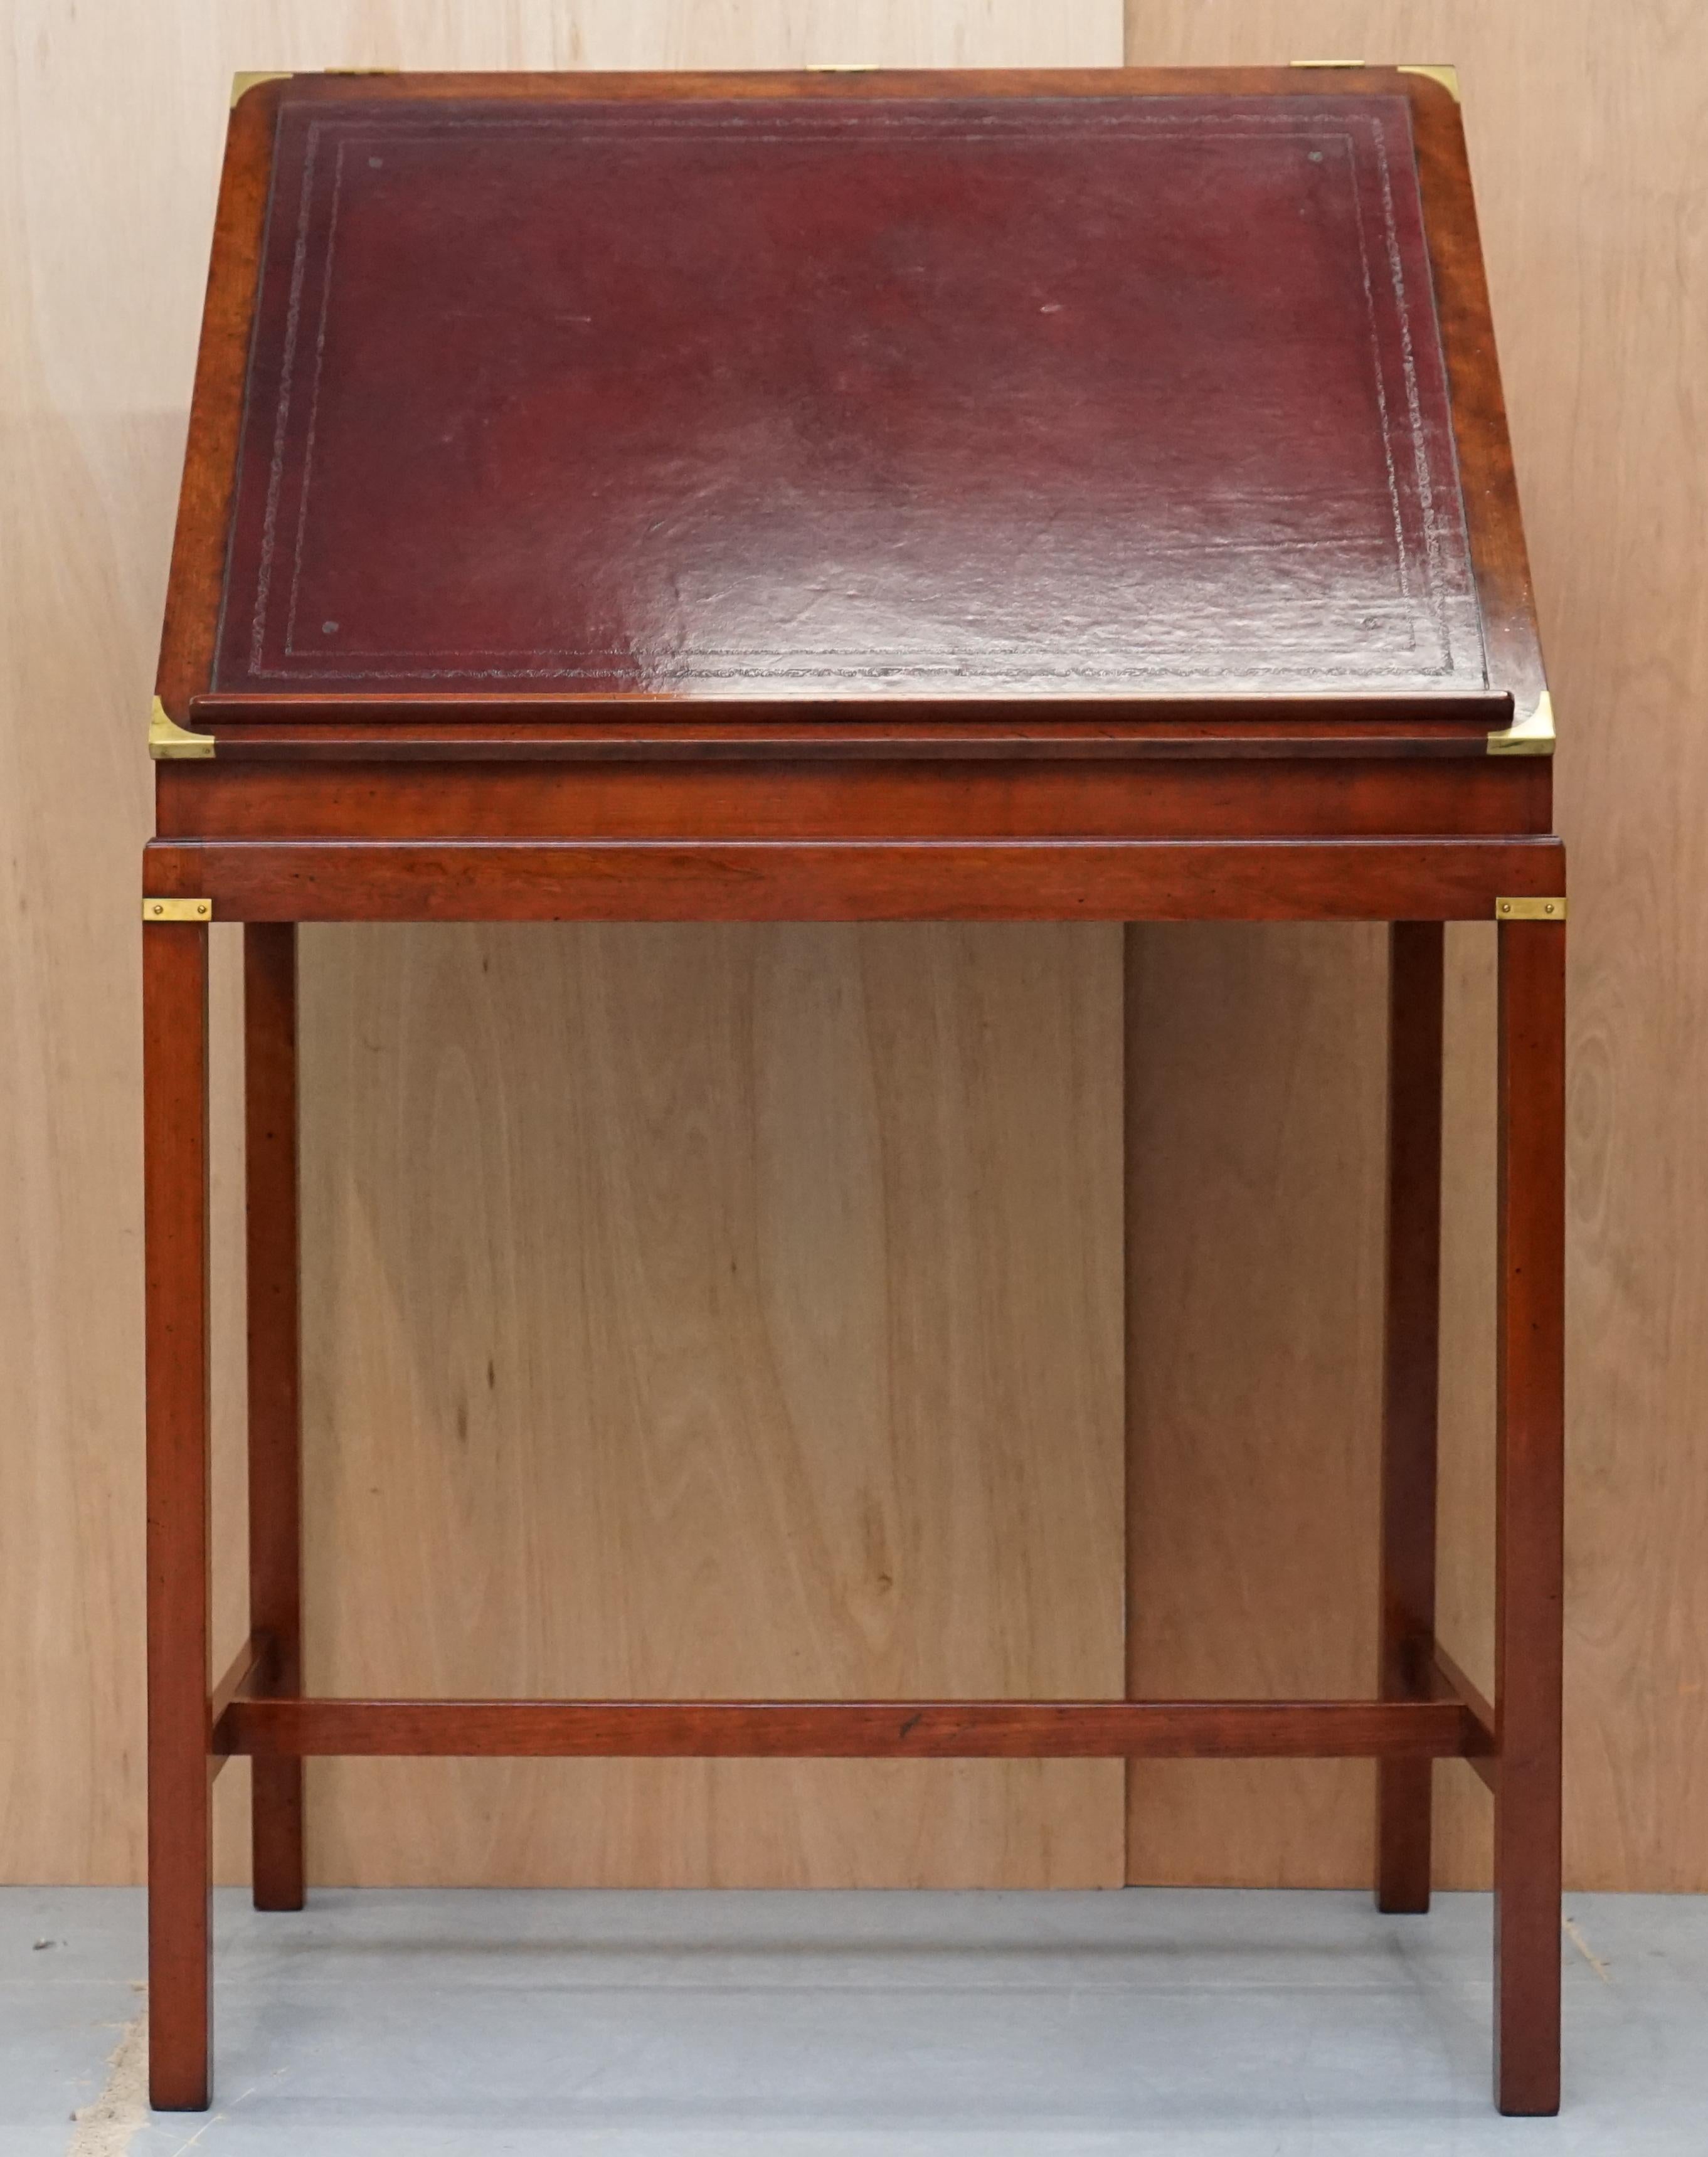 We are delighted to offer for sale this very rare one of a kind custom made to order from Kennedy Furniture retailed through Harrods London for £6000 Architects standing desk with oxblood leather writing surface in the Military Campaign style

A